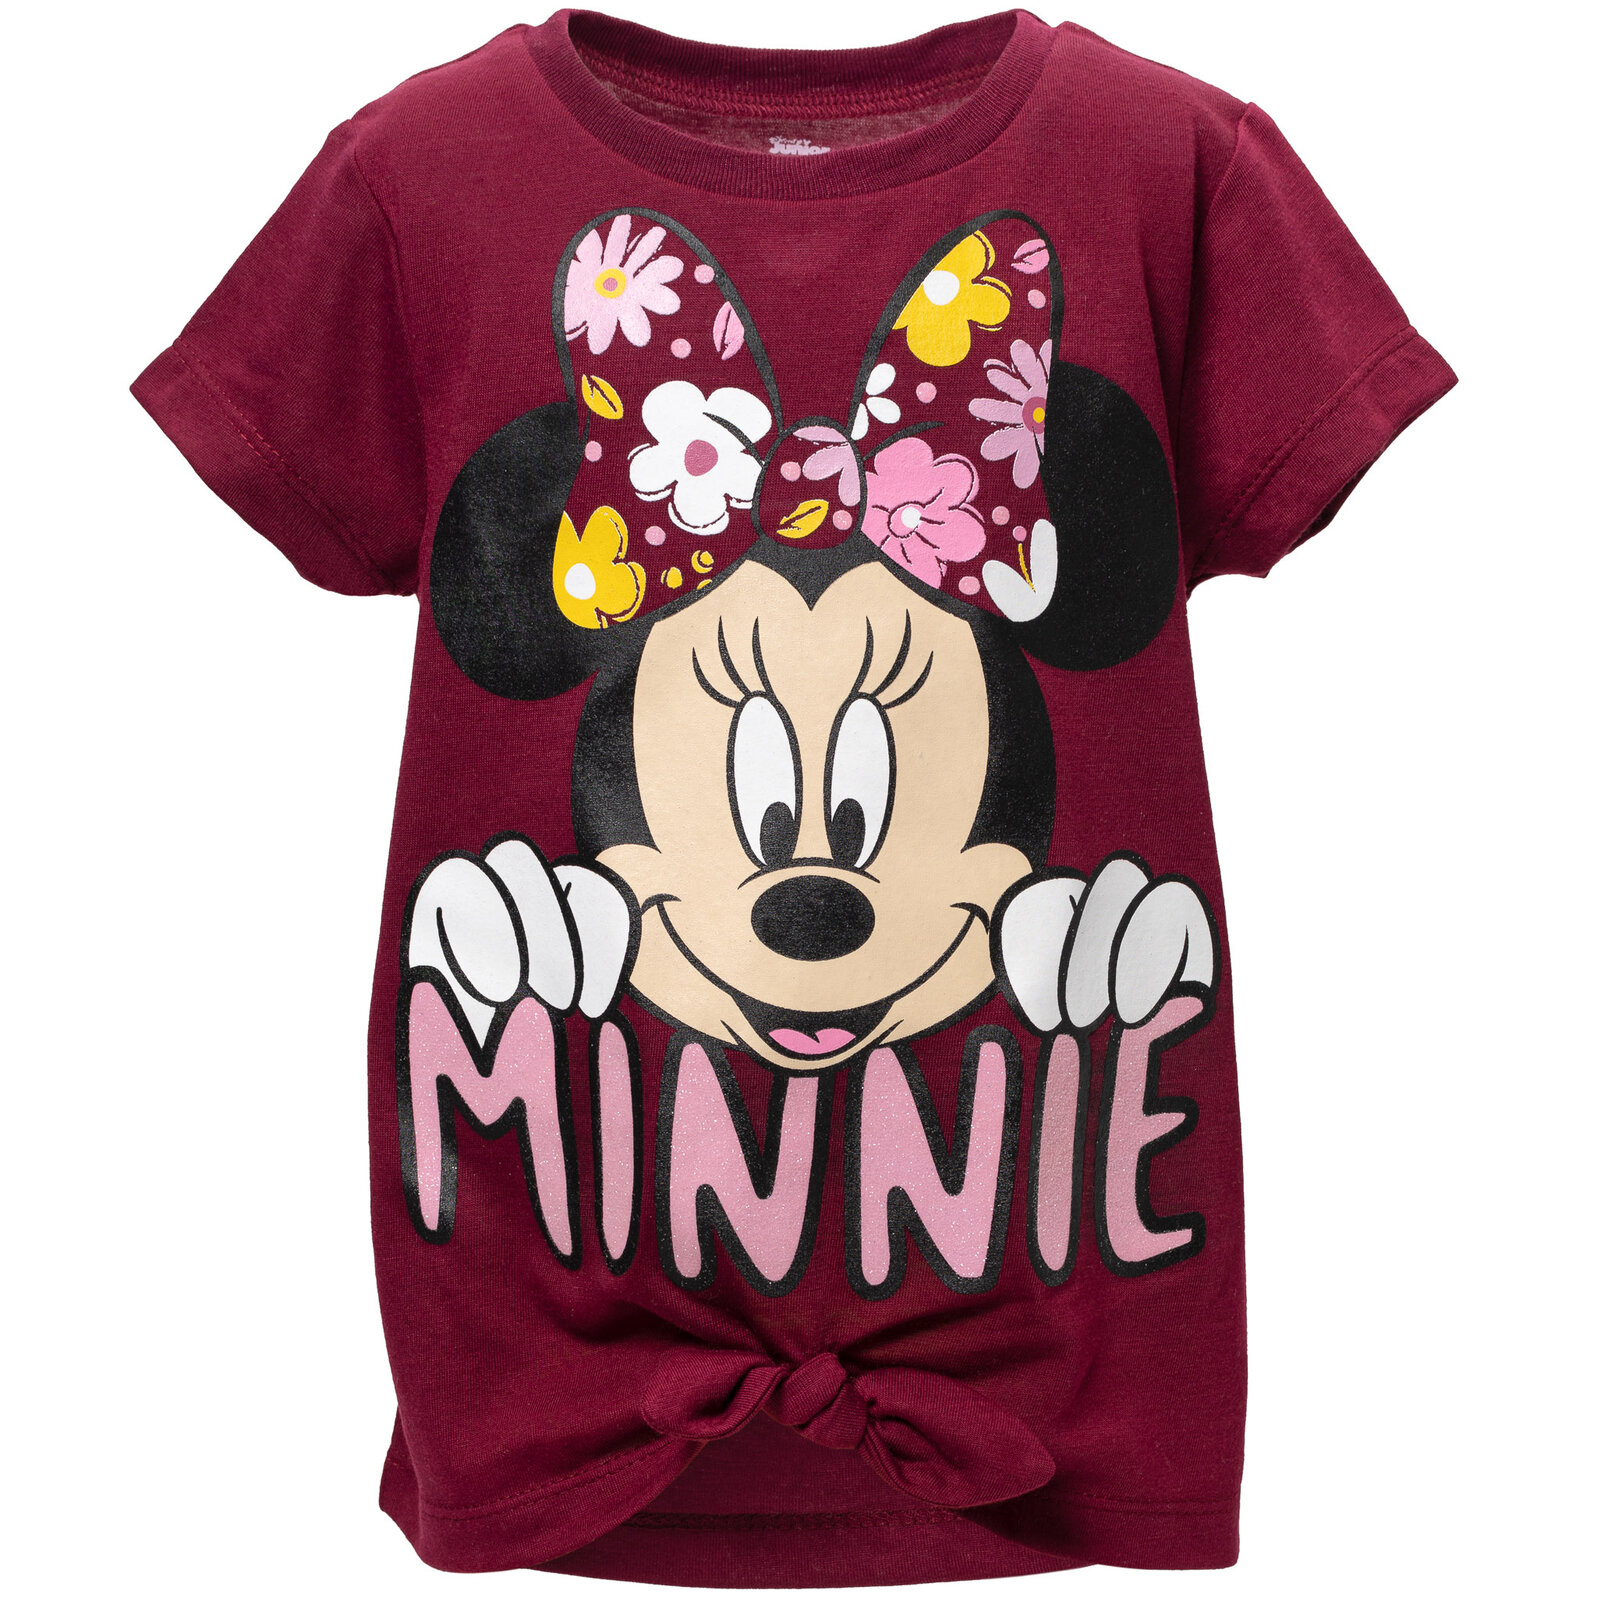 Disney Minnie Mouse Little Girls T-Shirt and Leggings Outfit Set Infant to Little Kid - image 4 of 5